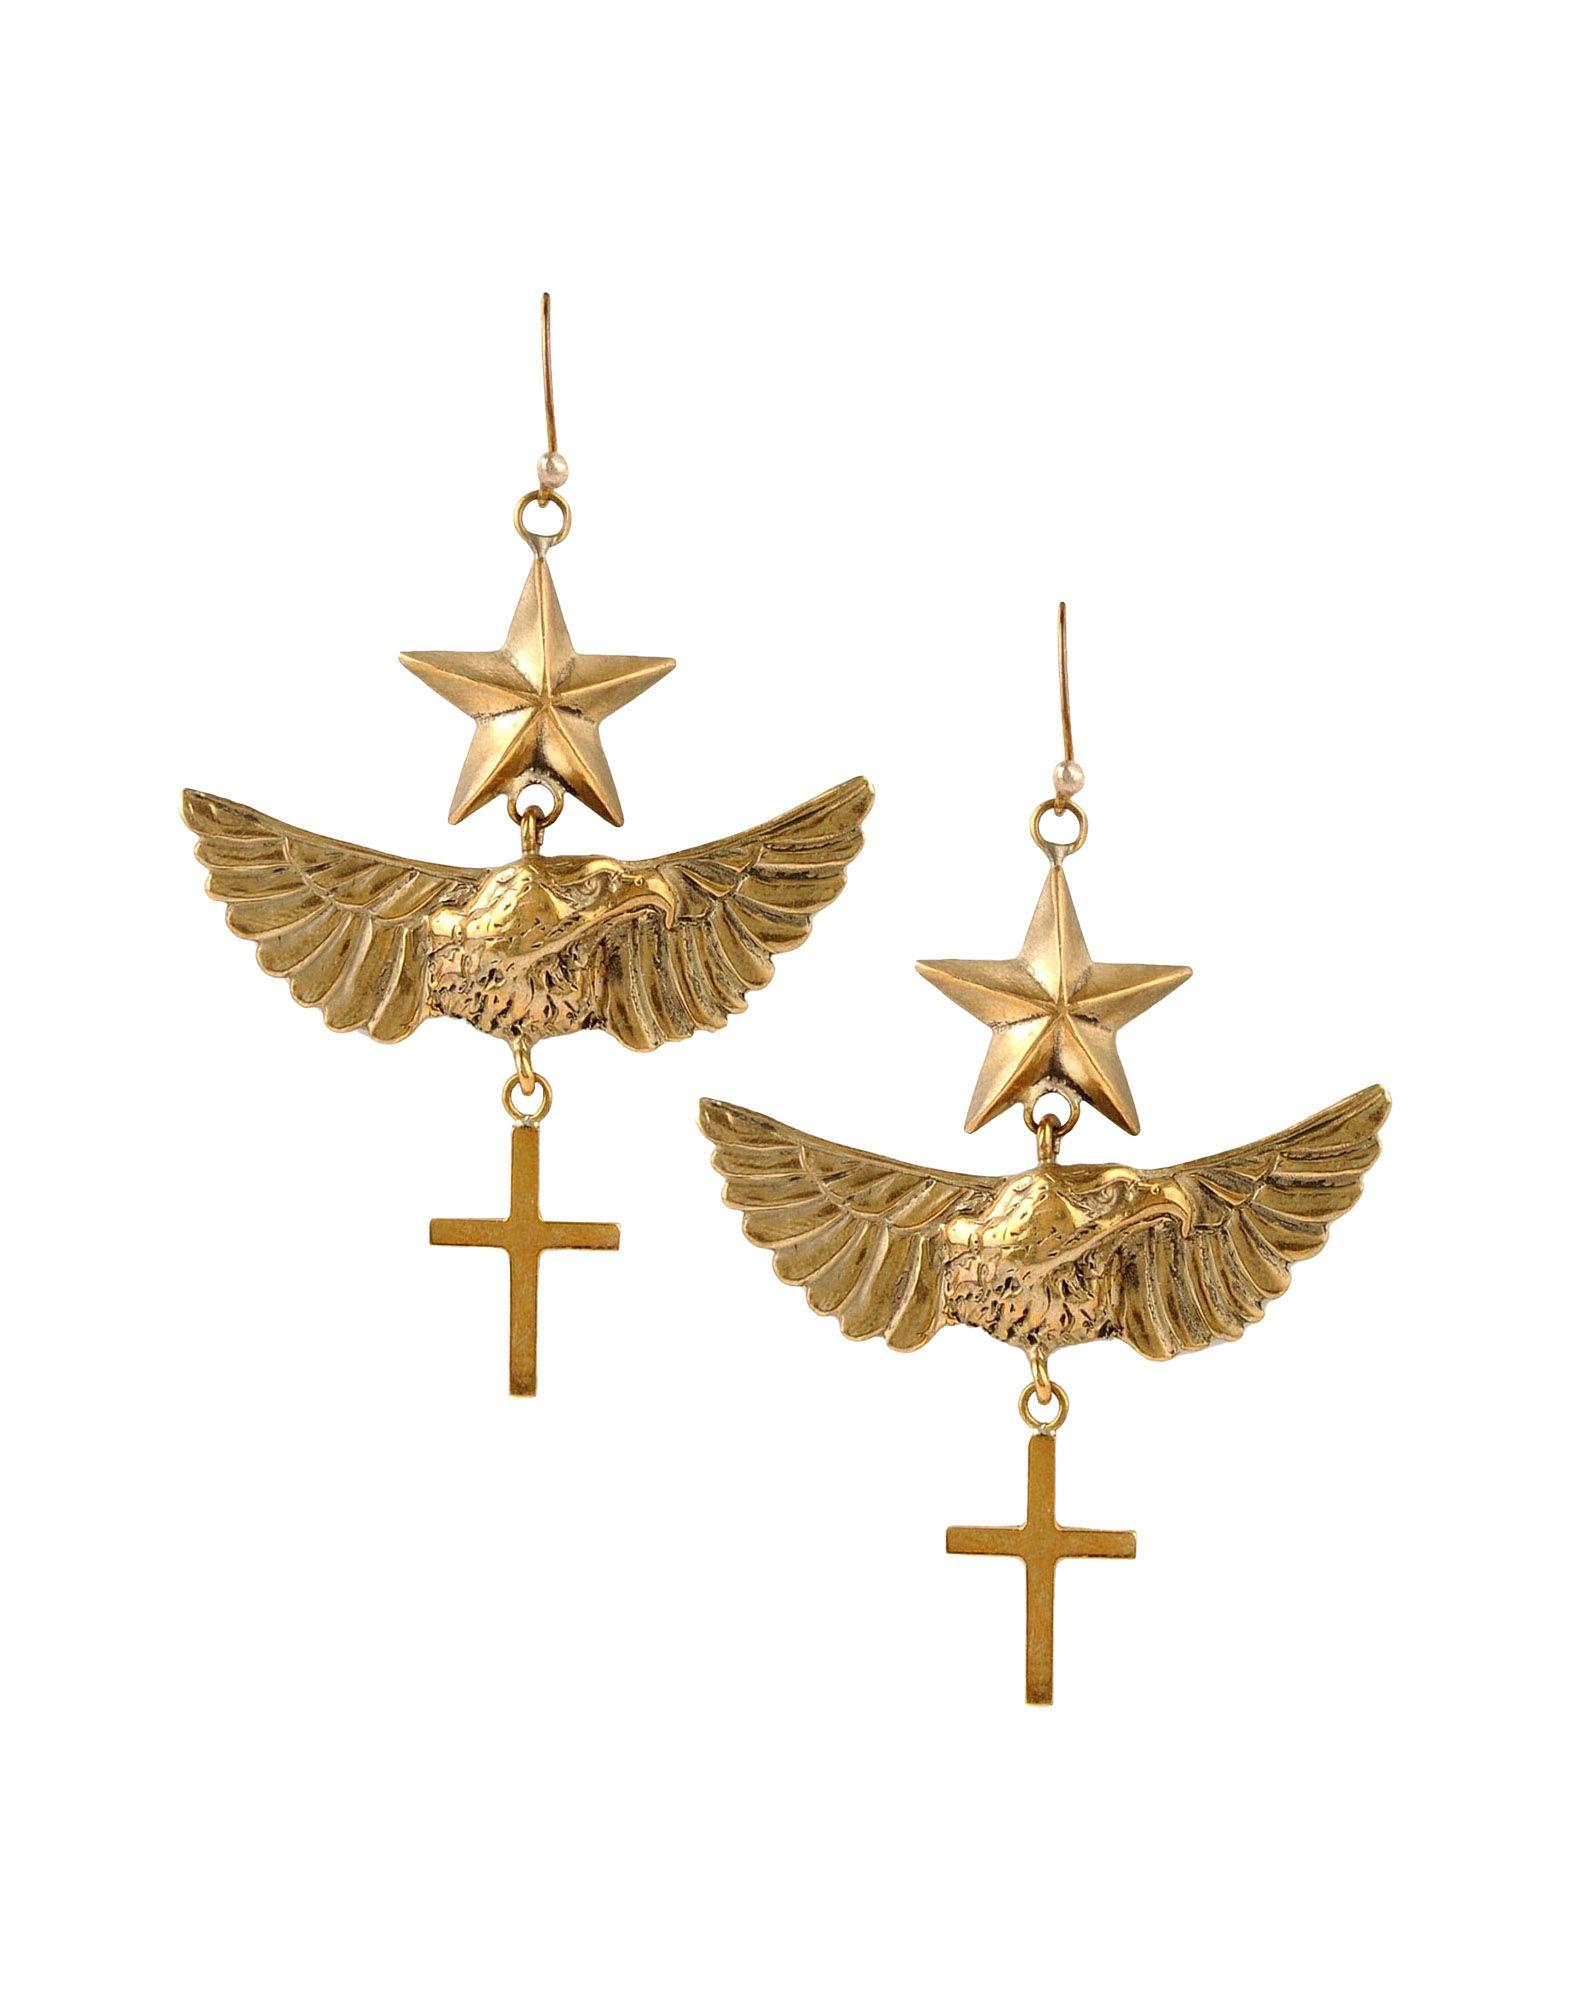 Emilio Pucci brass star cross and wing earrings